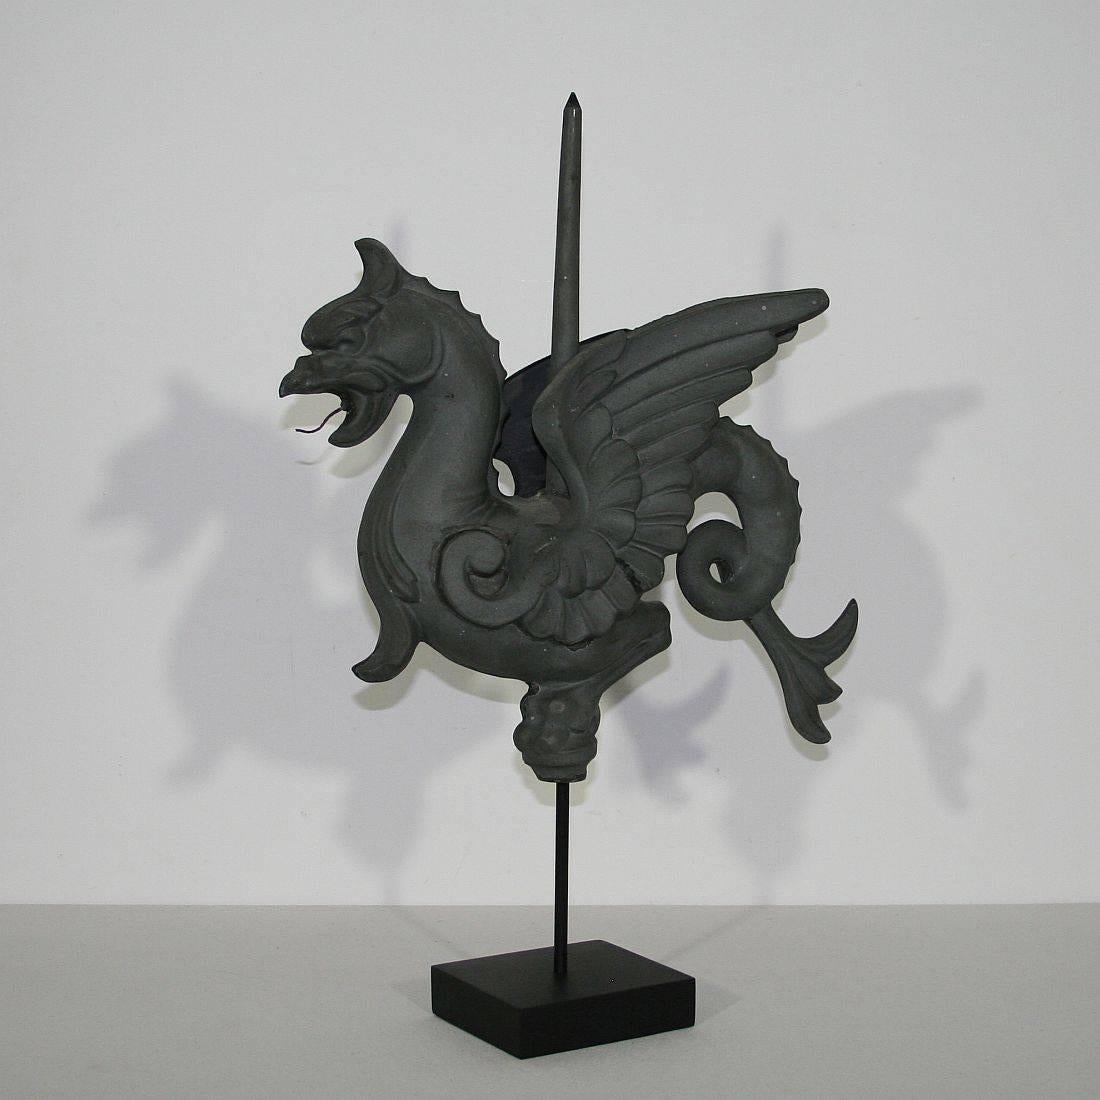 Beautiful zinc dragon
France, circa 1870
Good condition, small old repair.
More pictures are available on request.
Measurement is with the wooden base.